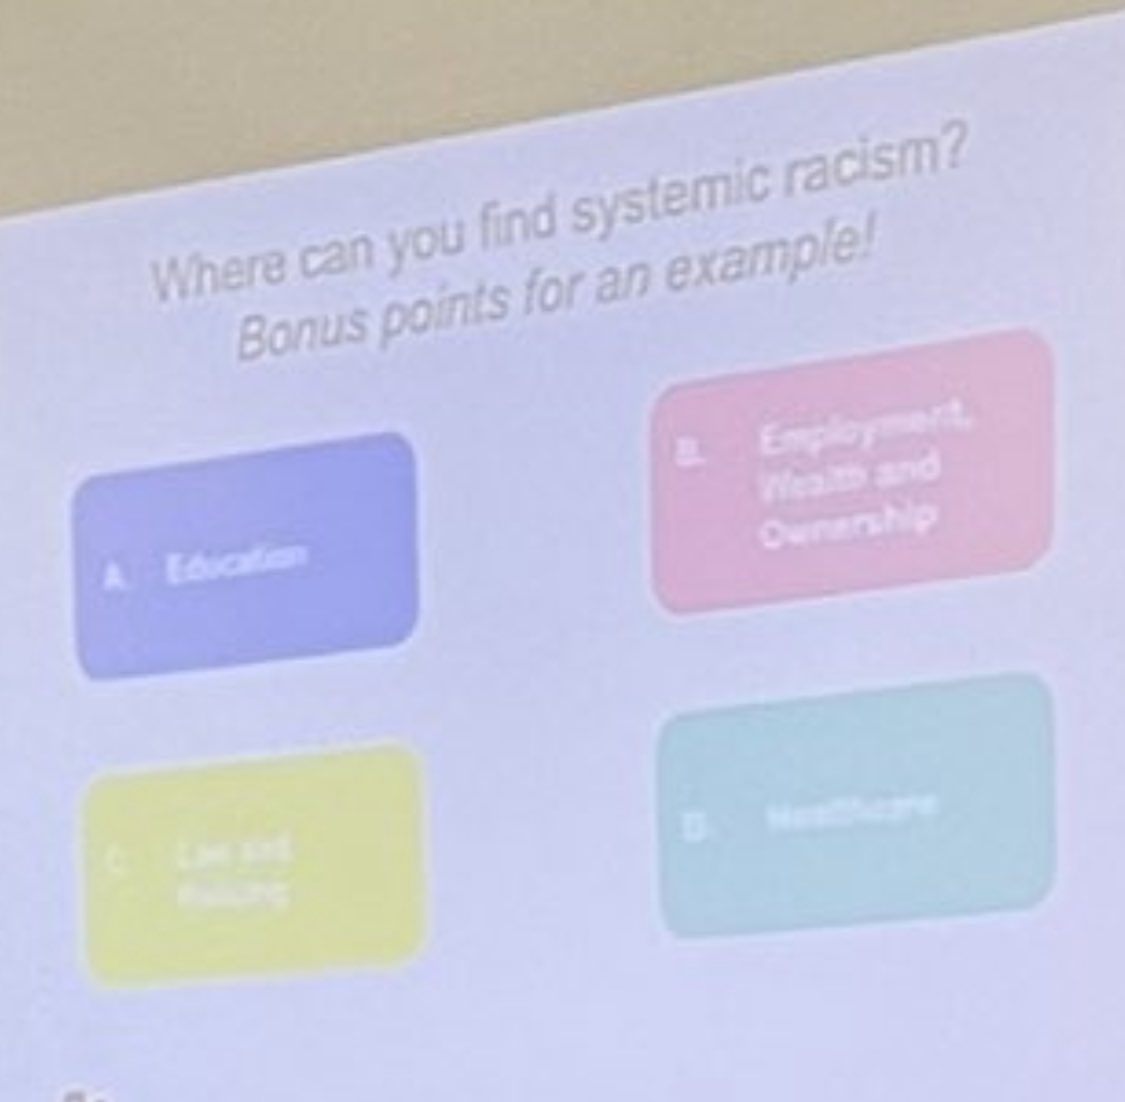 Presentation on “anti-racism” at Goldstone Park Elementary this month in Surrey, BC. Teaching kids to think “systemic racism” against non-whites is widespread.

@Surrey_Schools: consider reviewing @matlau10’s recent report, linked below, which debunks claims of “systemic racism”